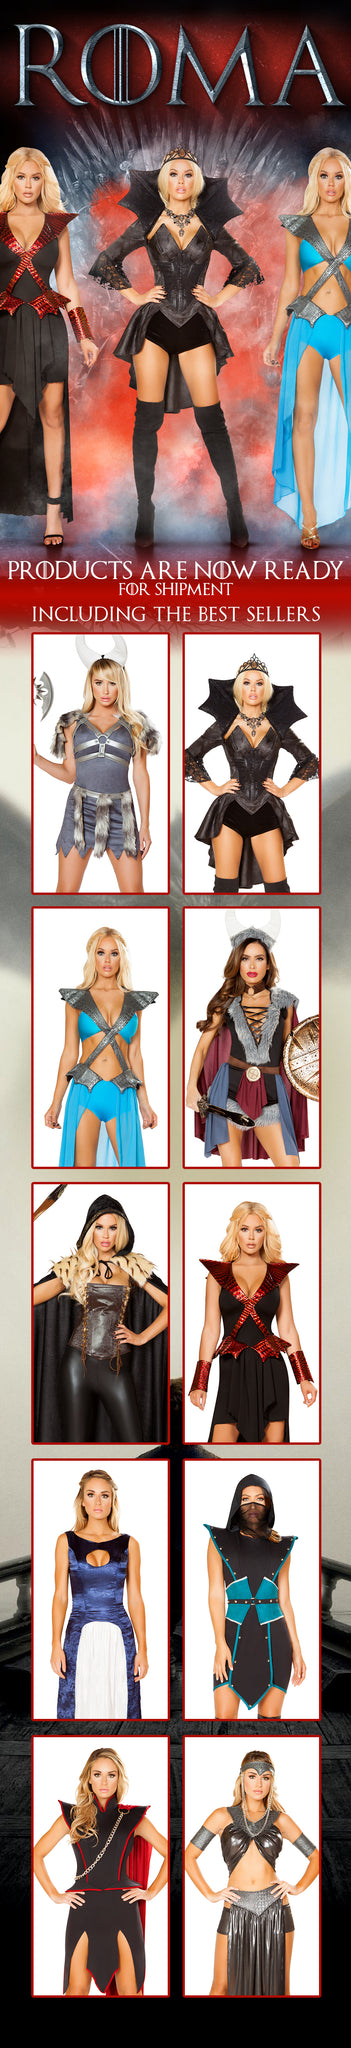 Roma Costume Collection Game of Thrones Email Blast 